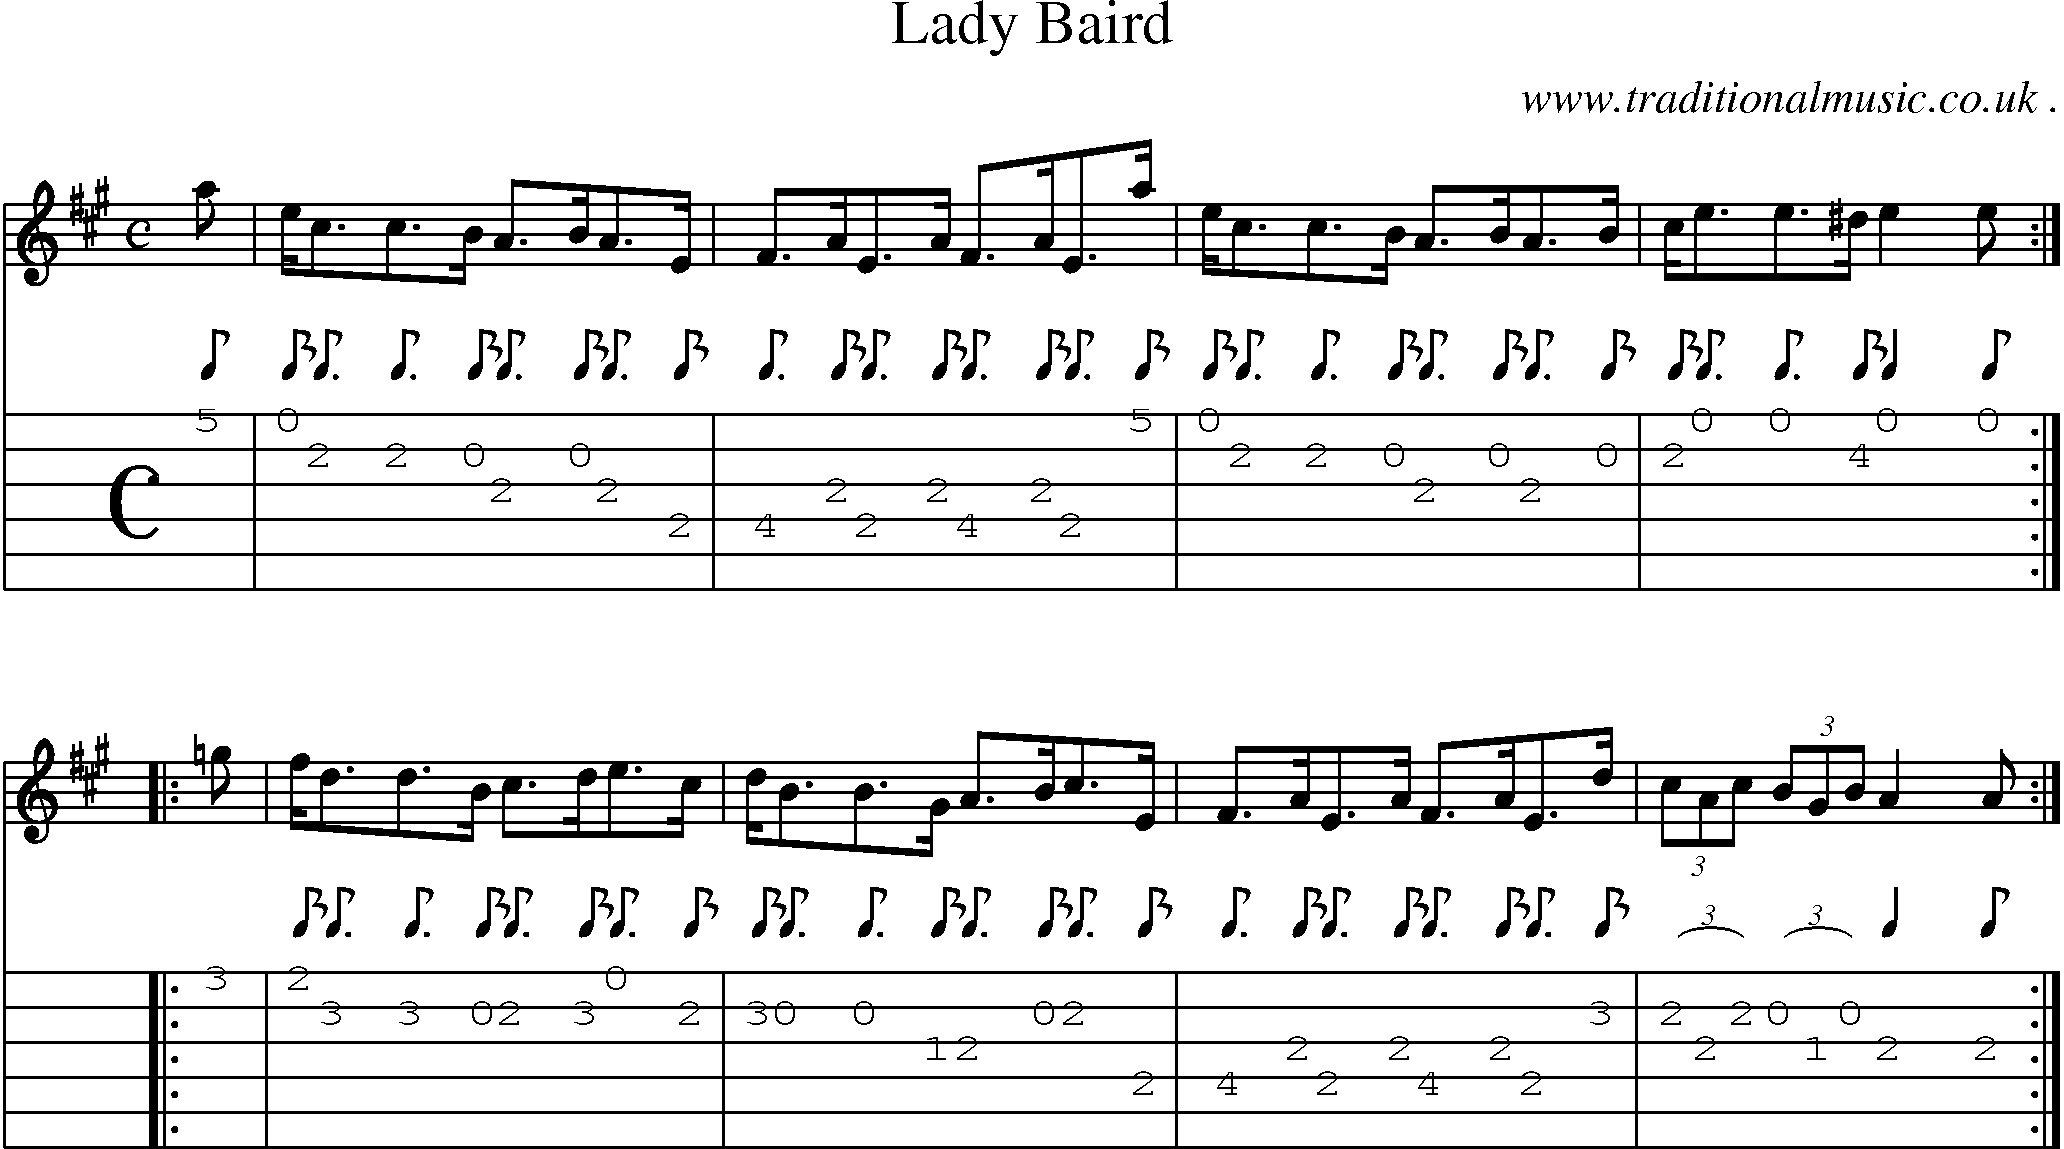 Sheet-music  score, Chords and Guitar Tabs for Lady Baird